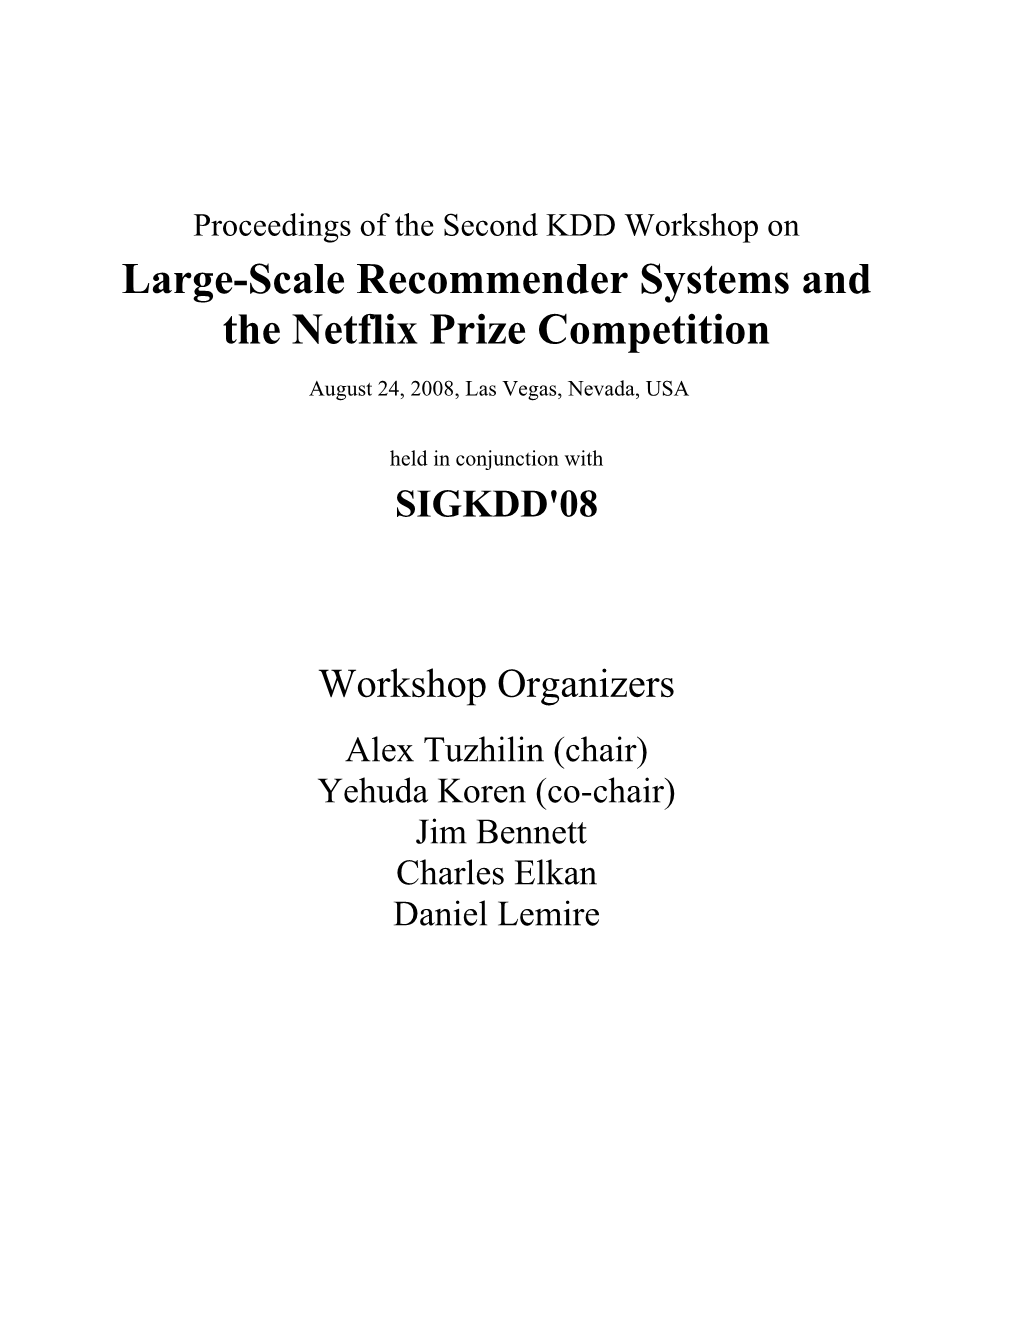 Large-Scale Recommender Systems and the Netflix Prize Competition